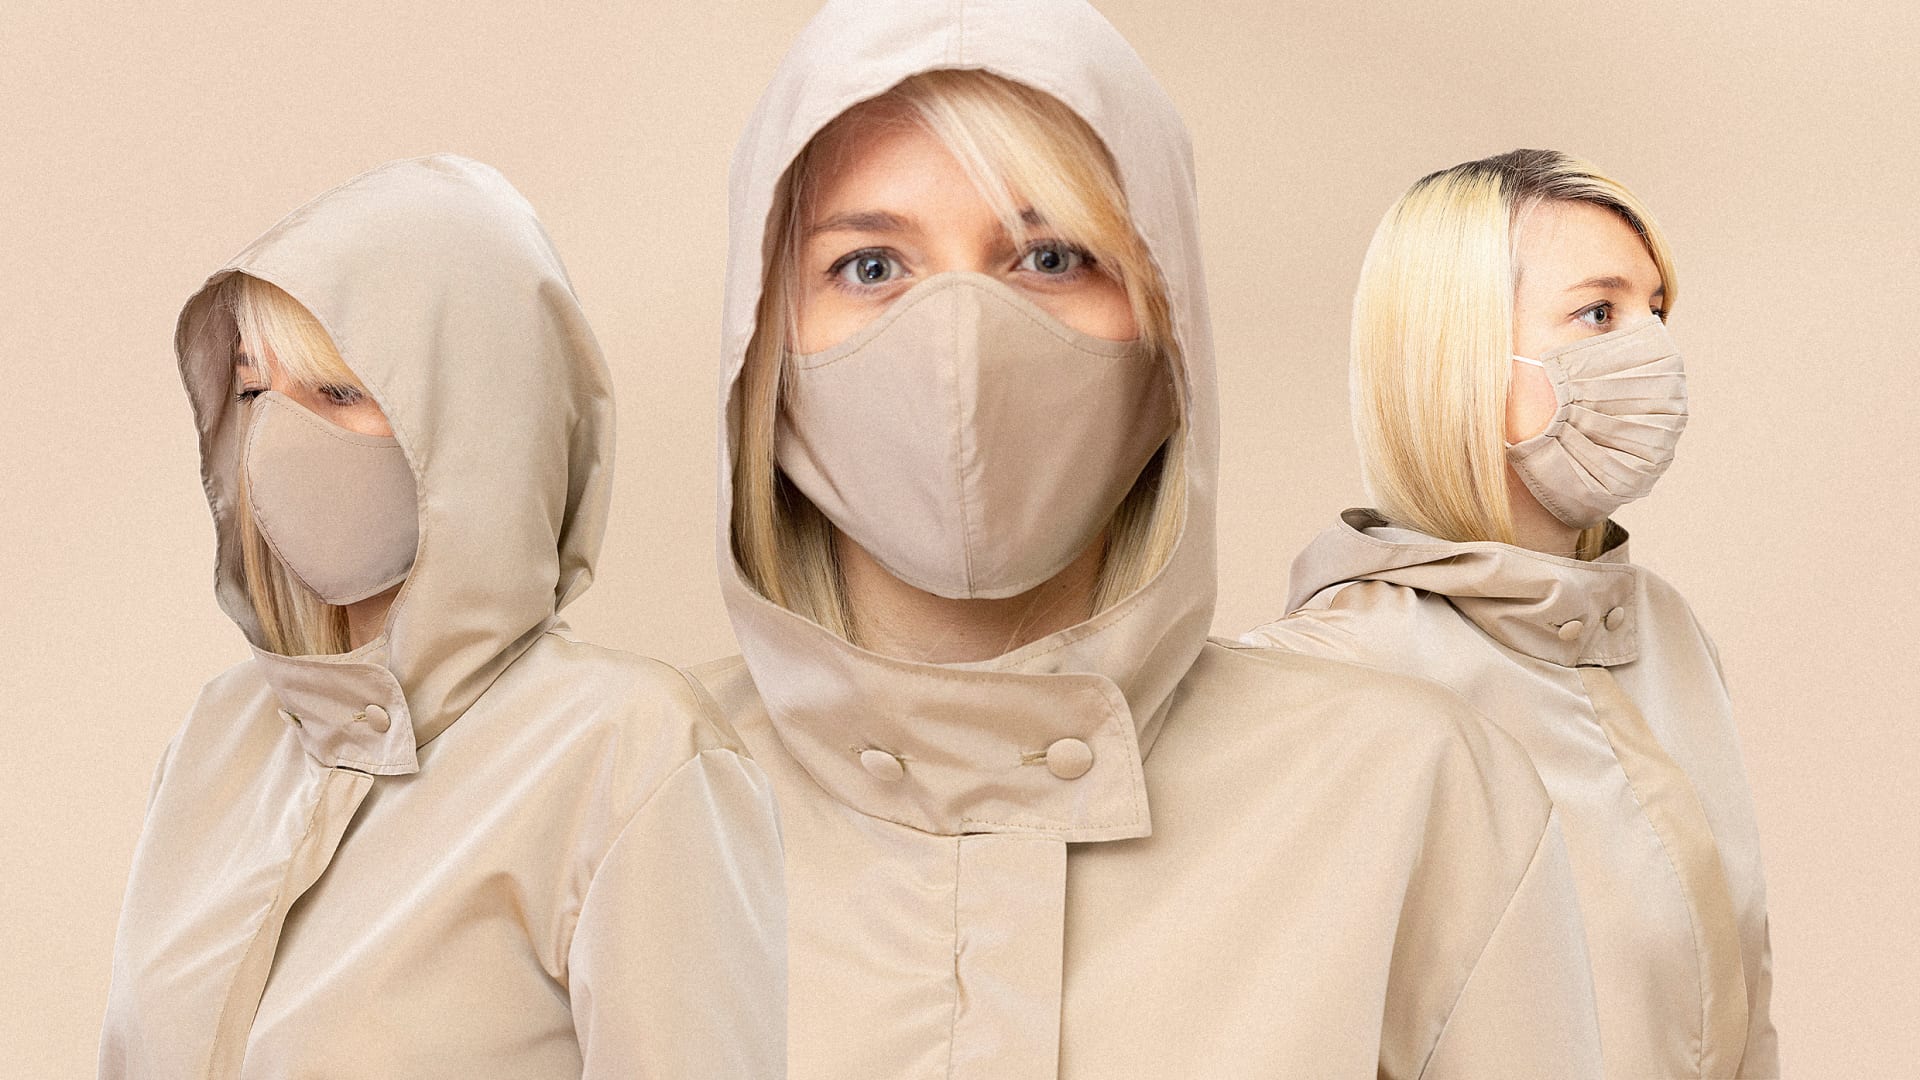 This ‘travel jumpsuit’ was designed for flying in a pandemic